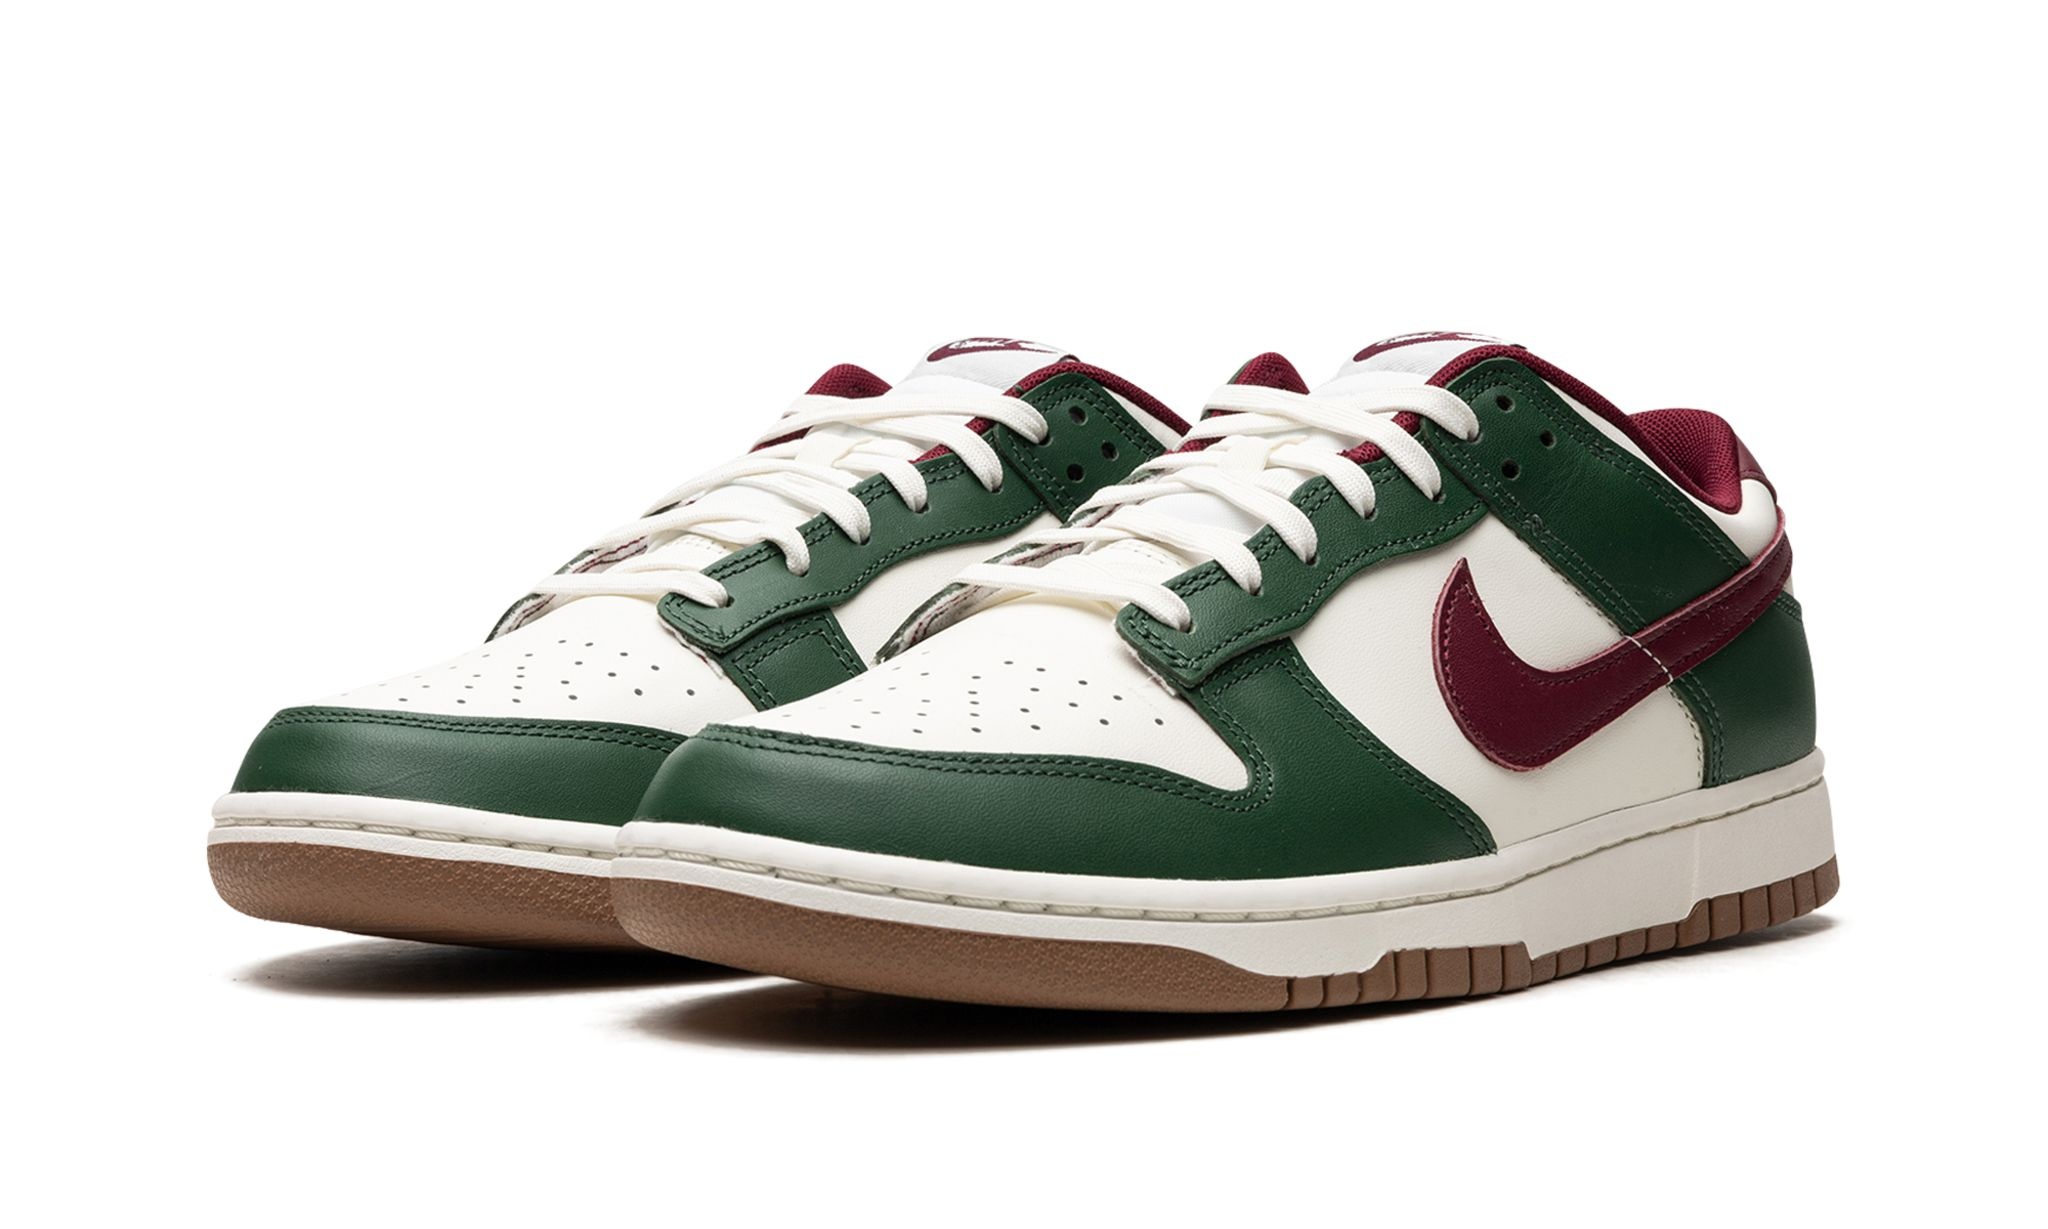 Dunk Low Retro "Gorge Green / Team Red" - 2